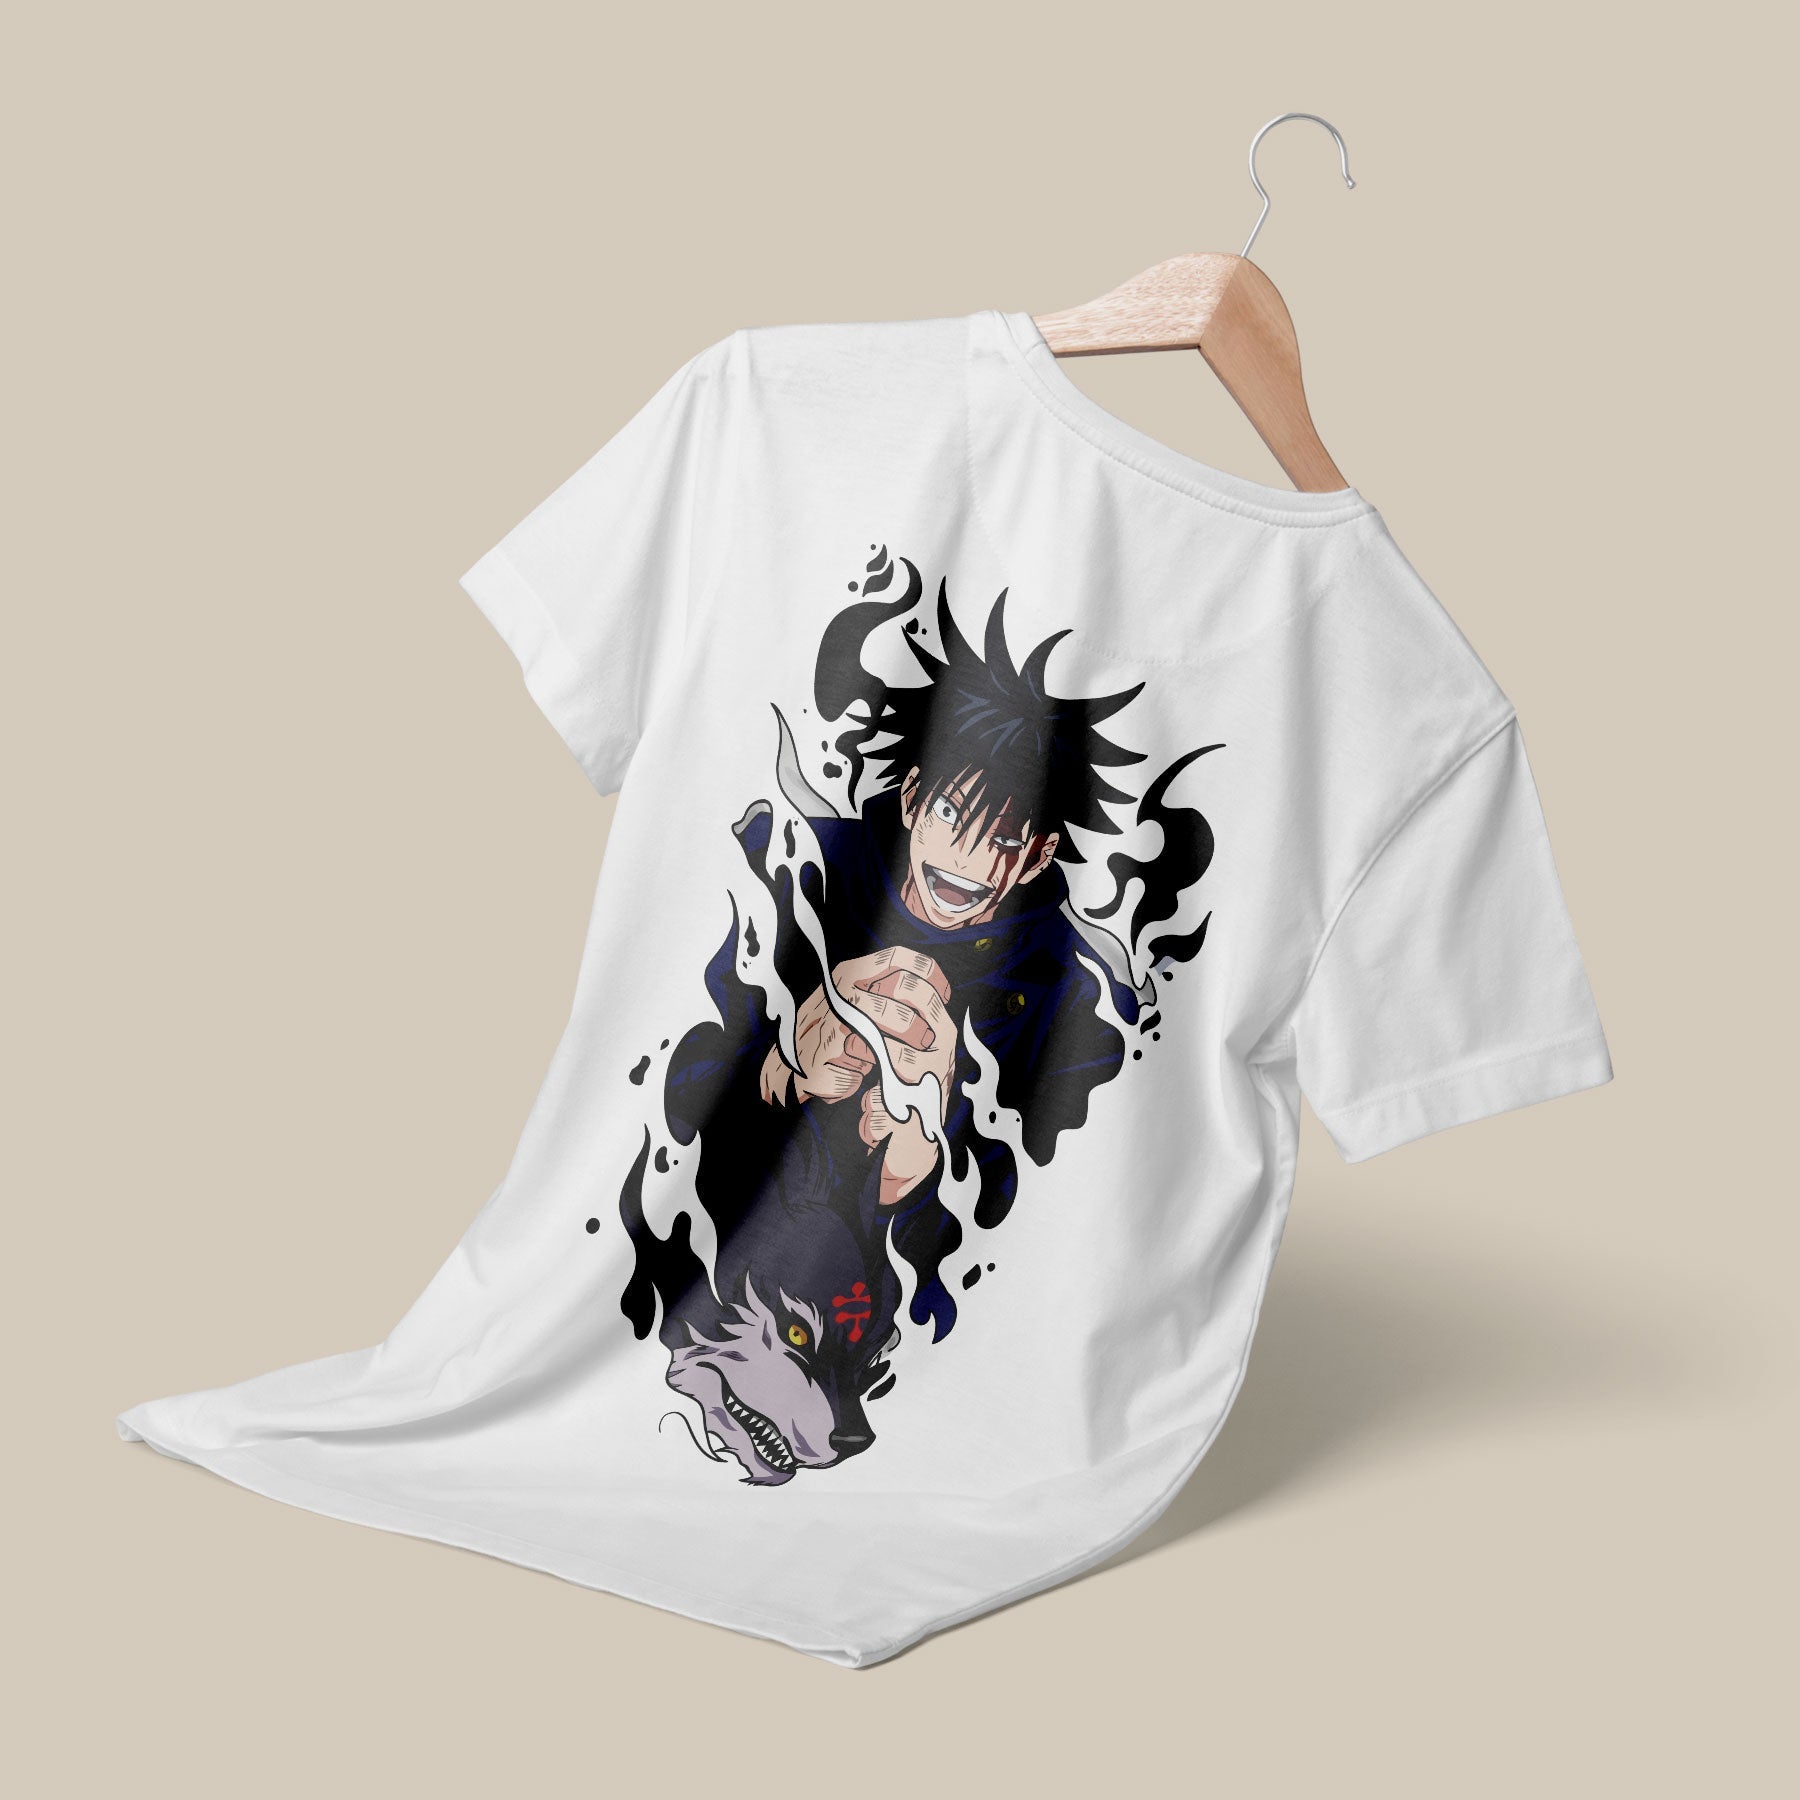 Itachi Anime Printed T-Shirt For Men And Women